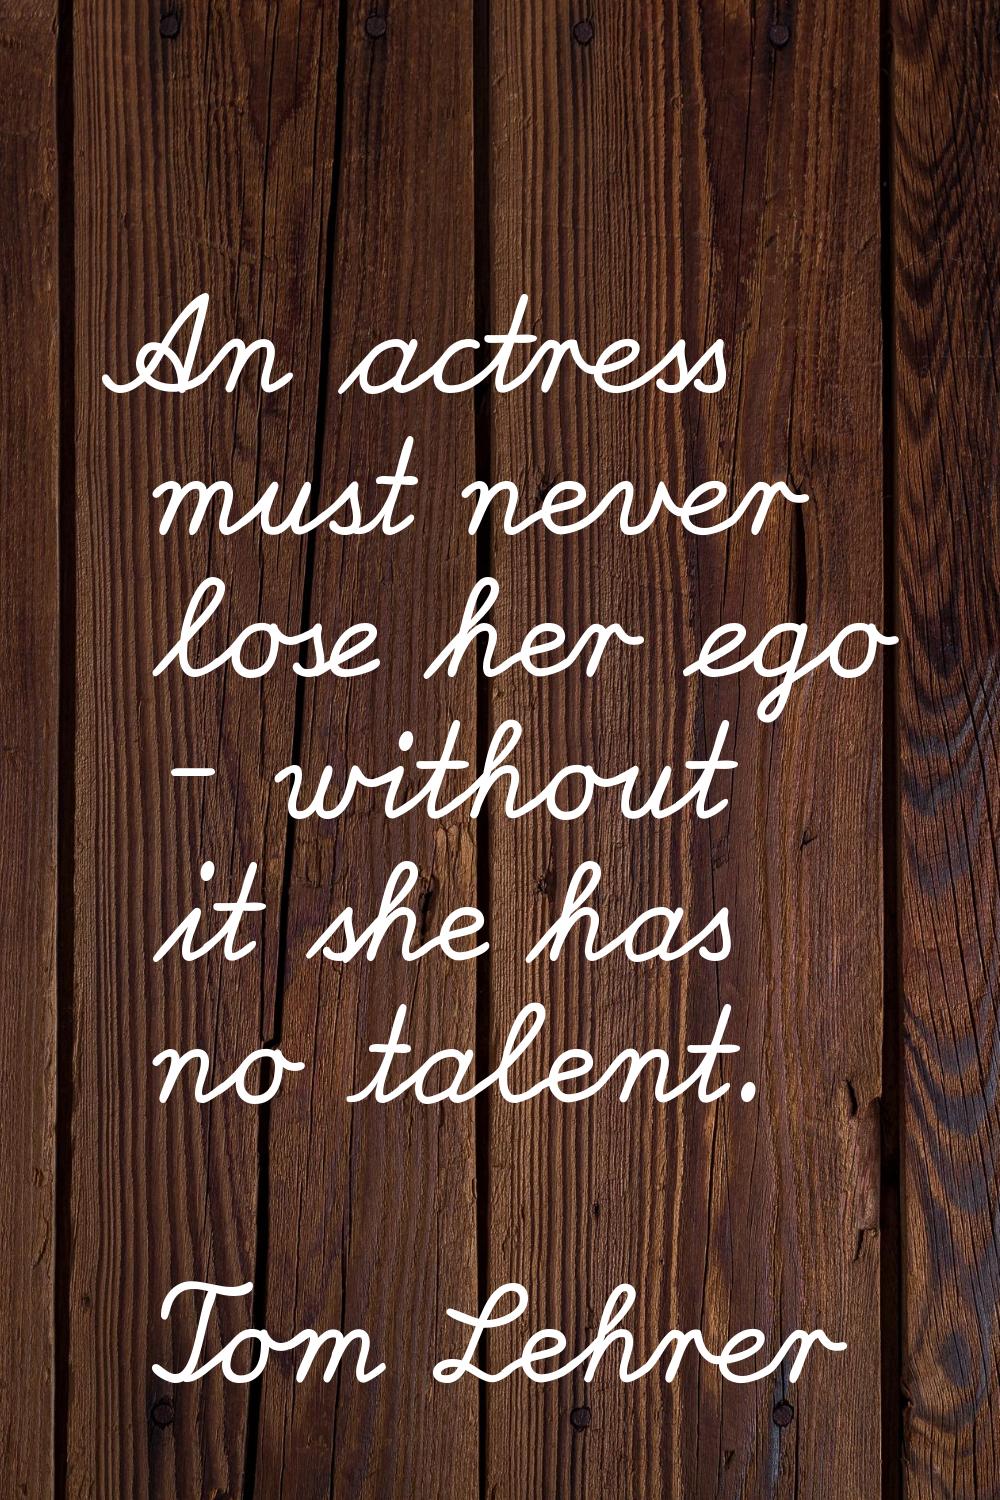 An actress must never lose her ego - without it she has no talent.